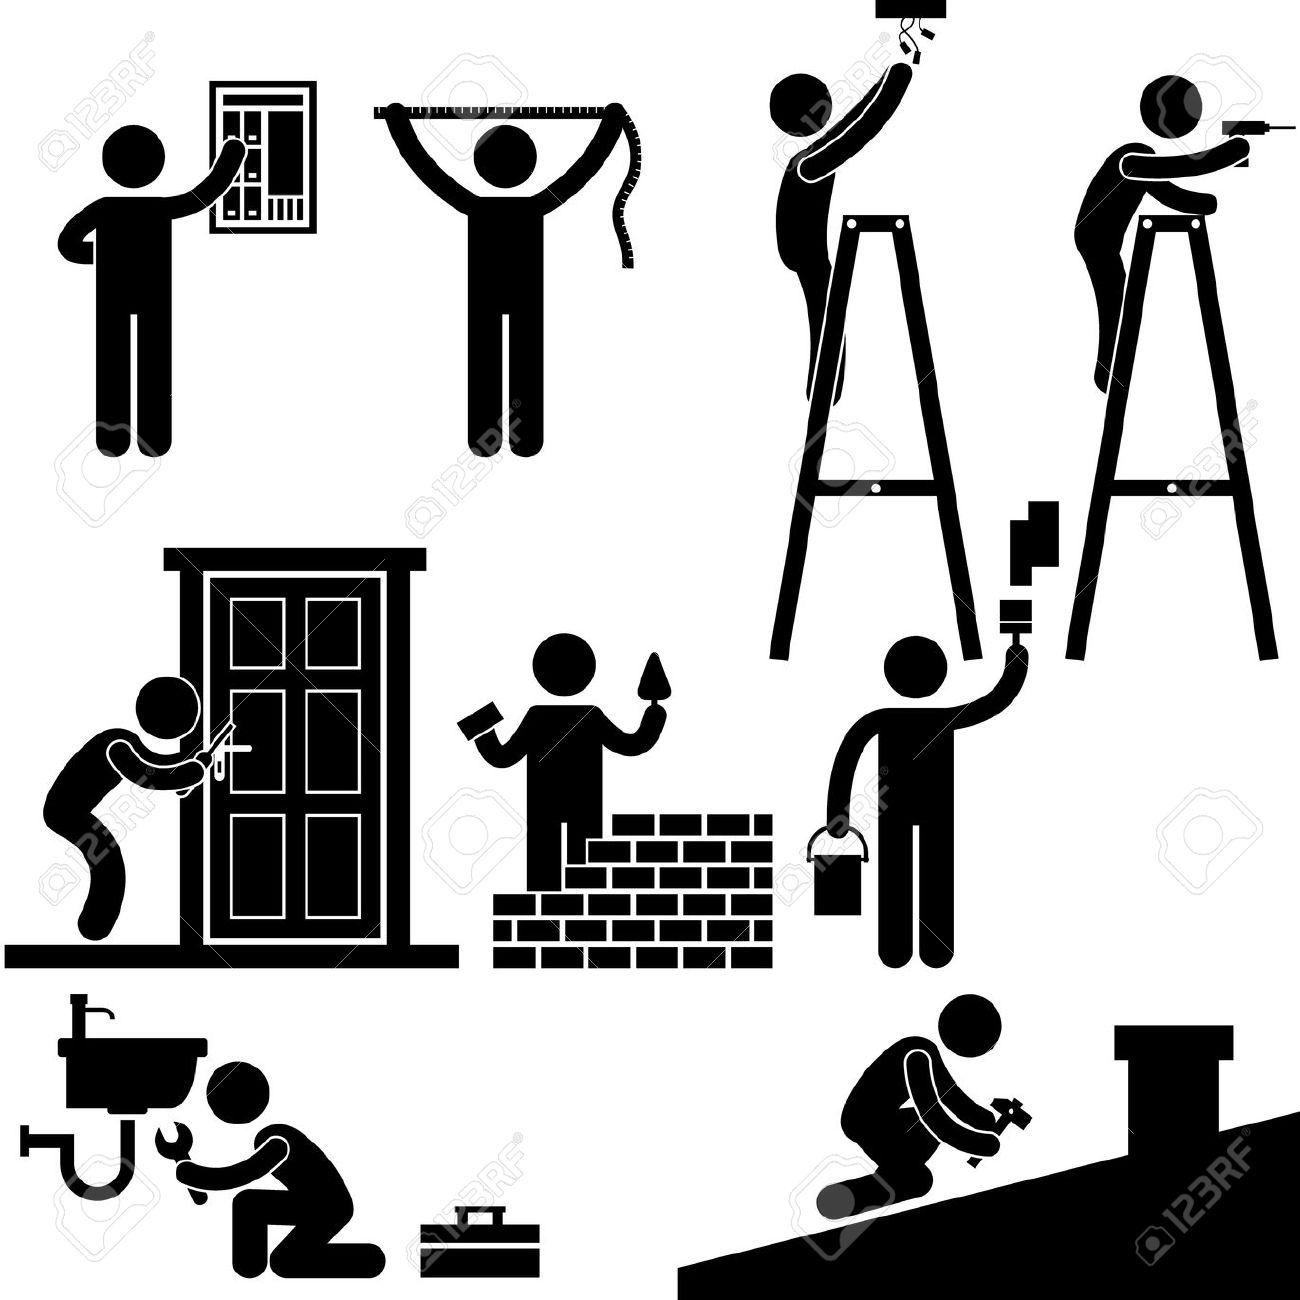 Renovation work clipart 20 free Cliparts | Download images on